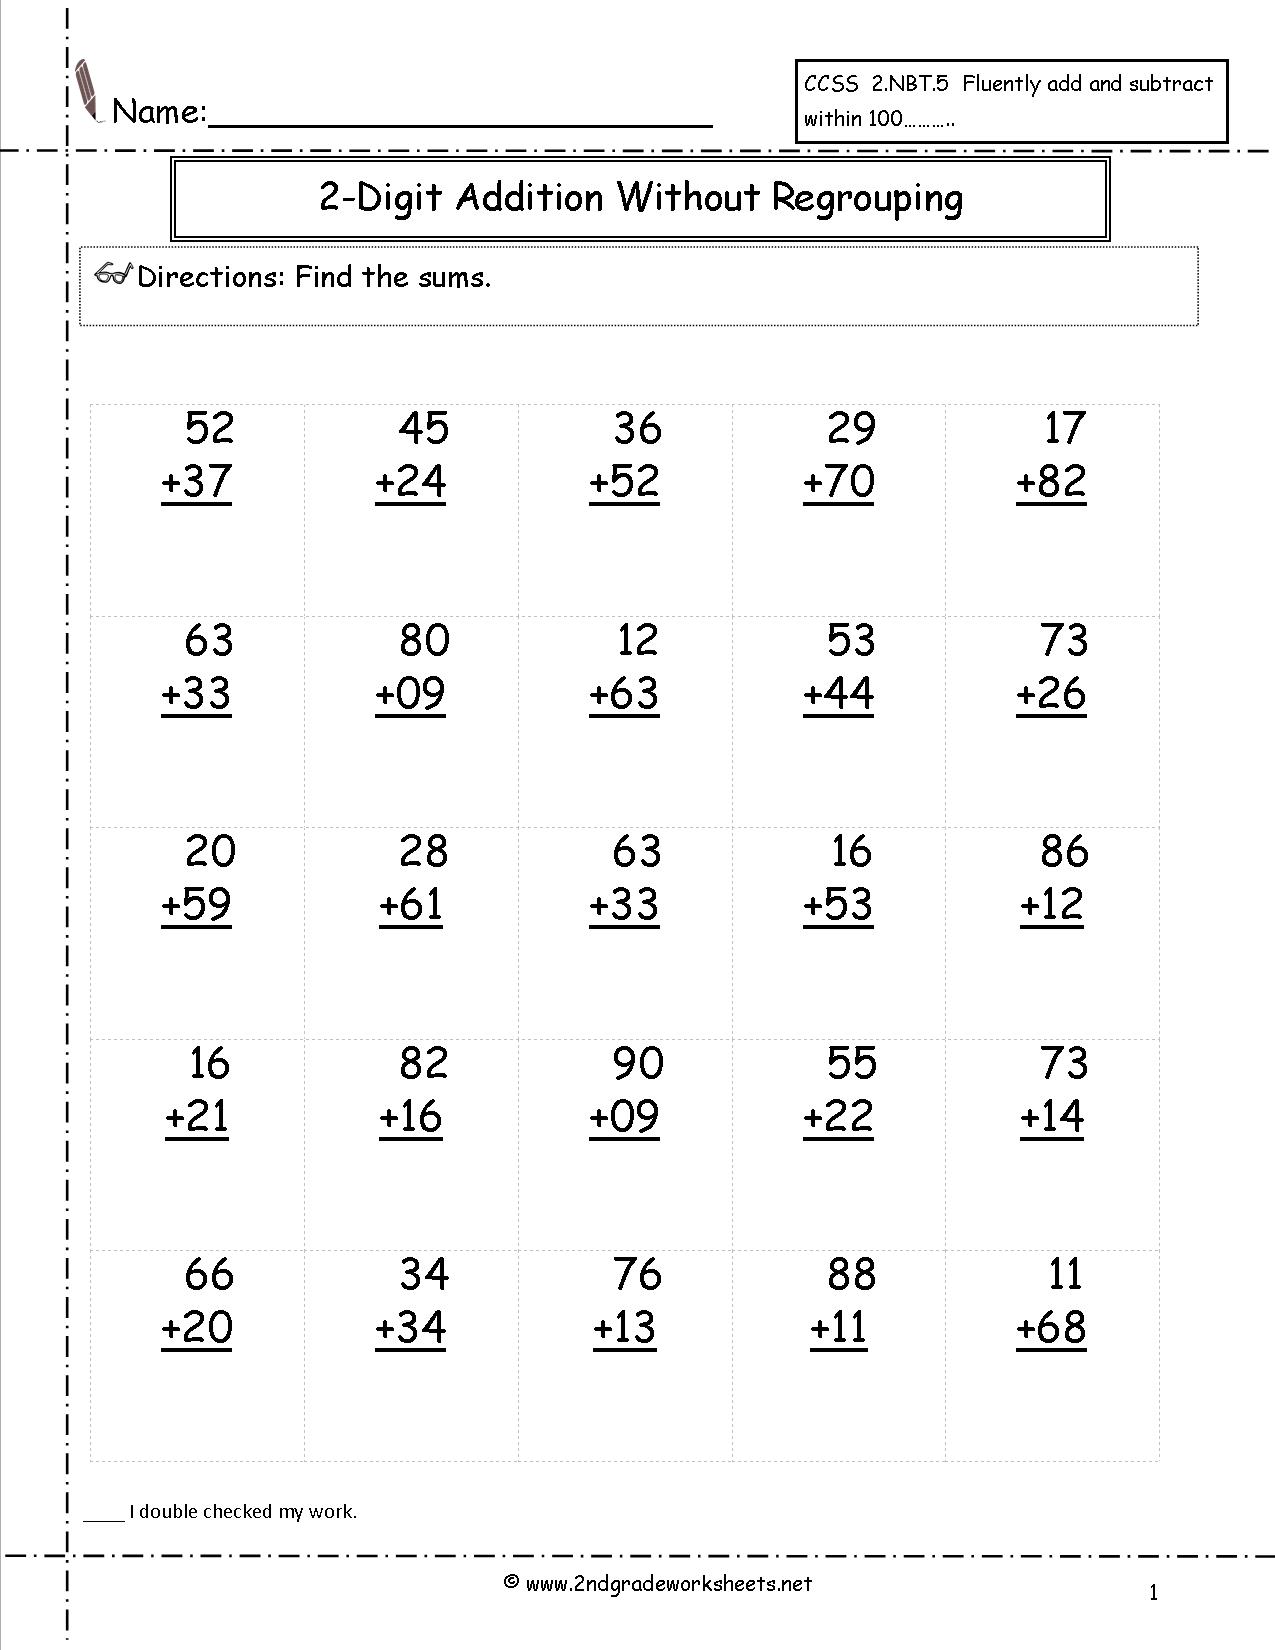 4 Best Images Of 2nd Grade Regrouping Math Worksheets Free Printable 